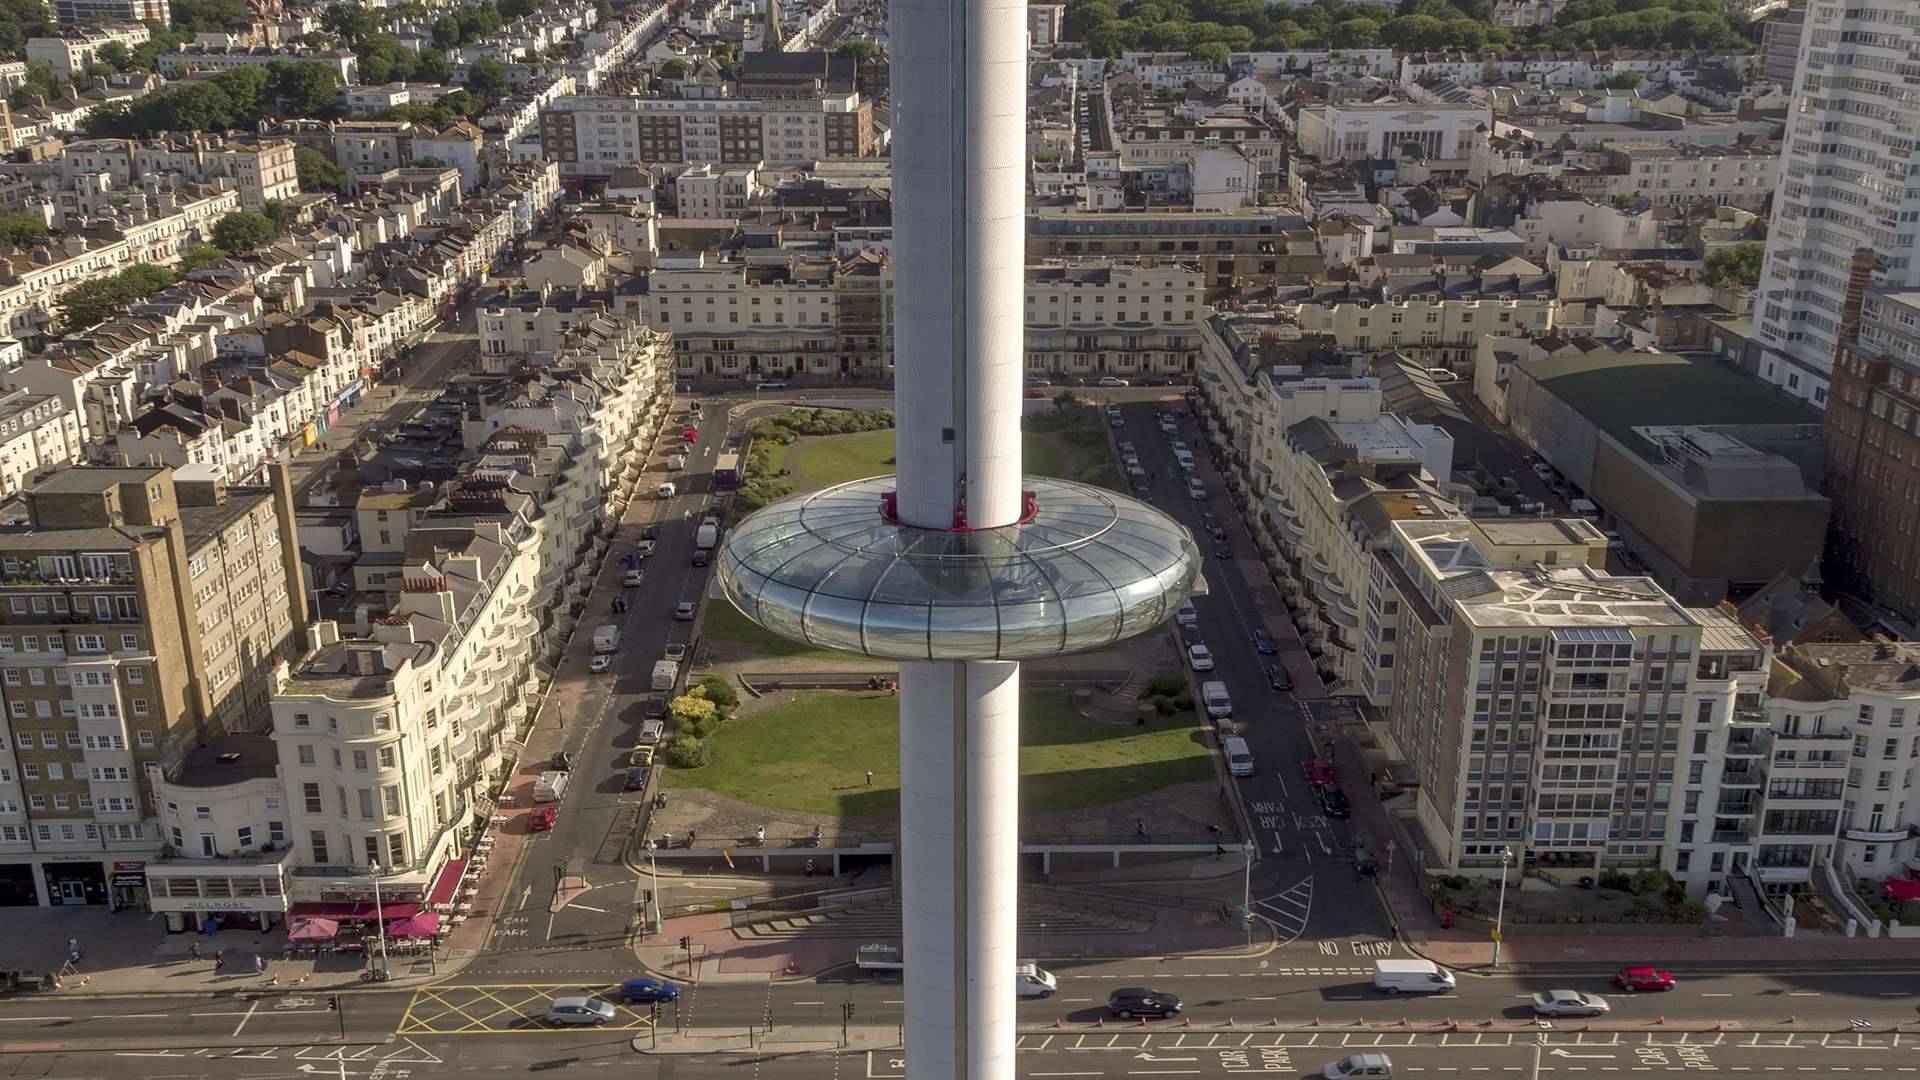 The 162m British Airways i360 is the tallest moving observation tower in the world